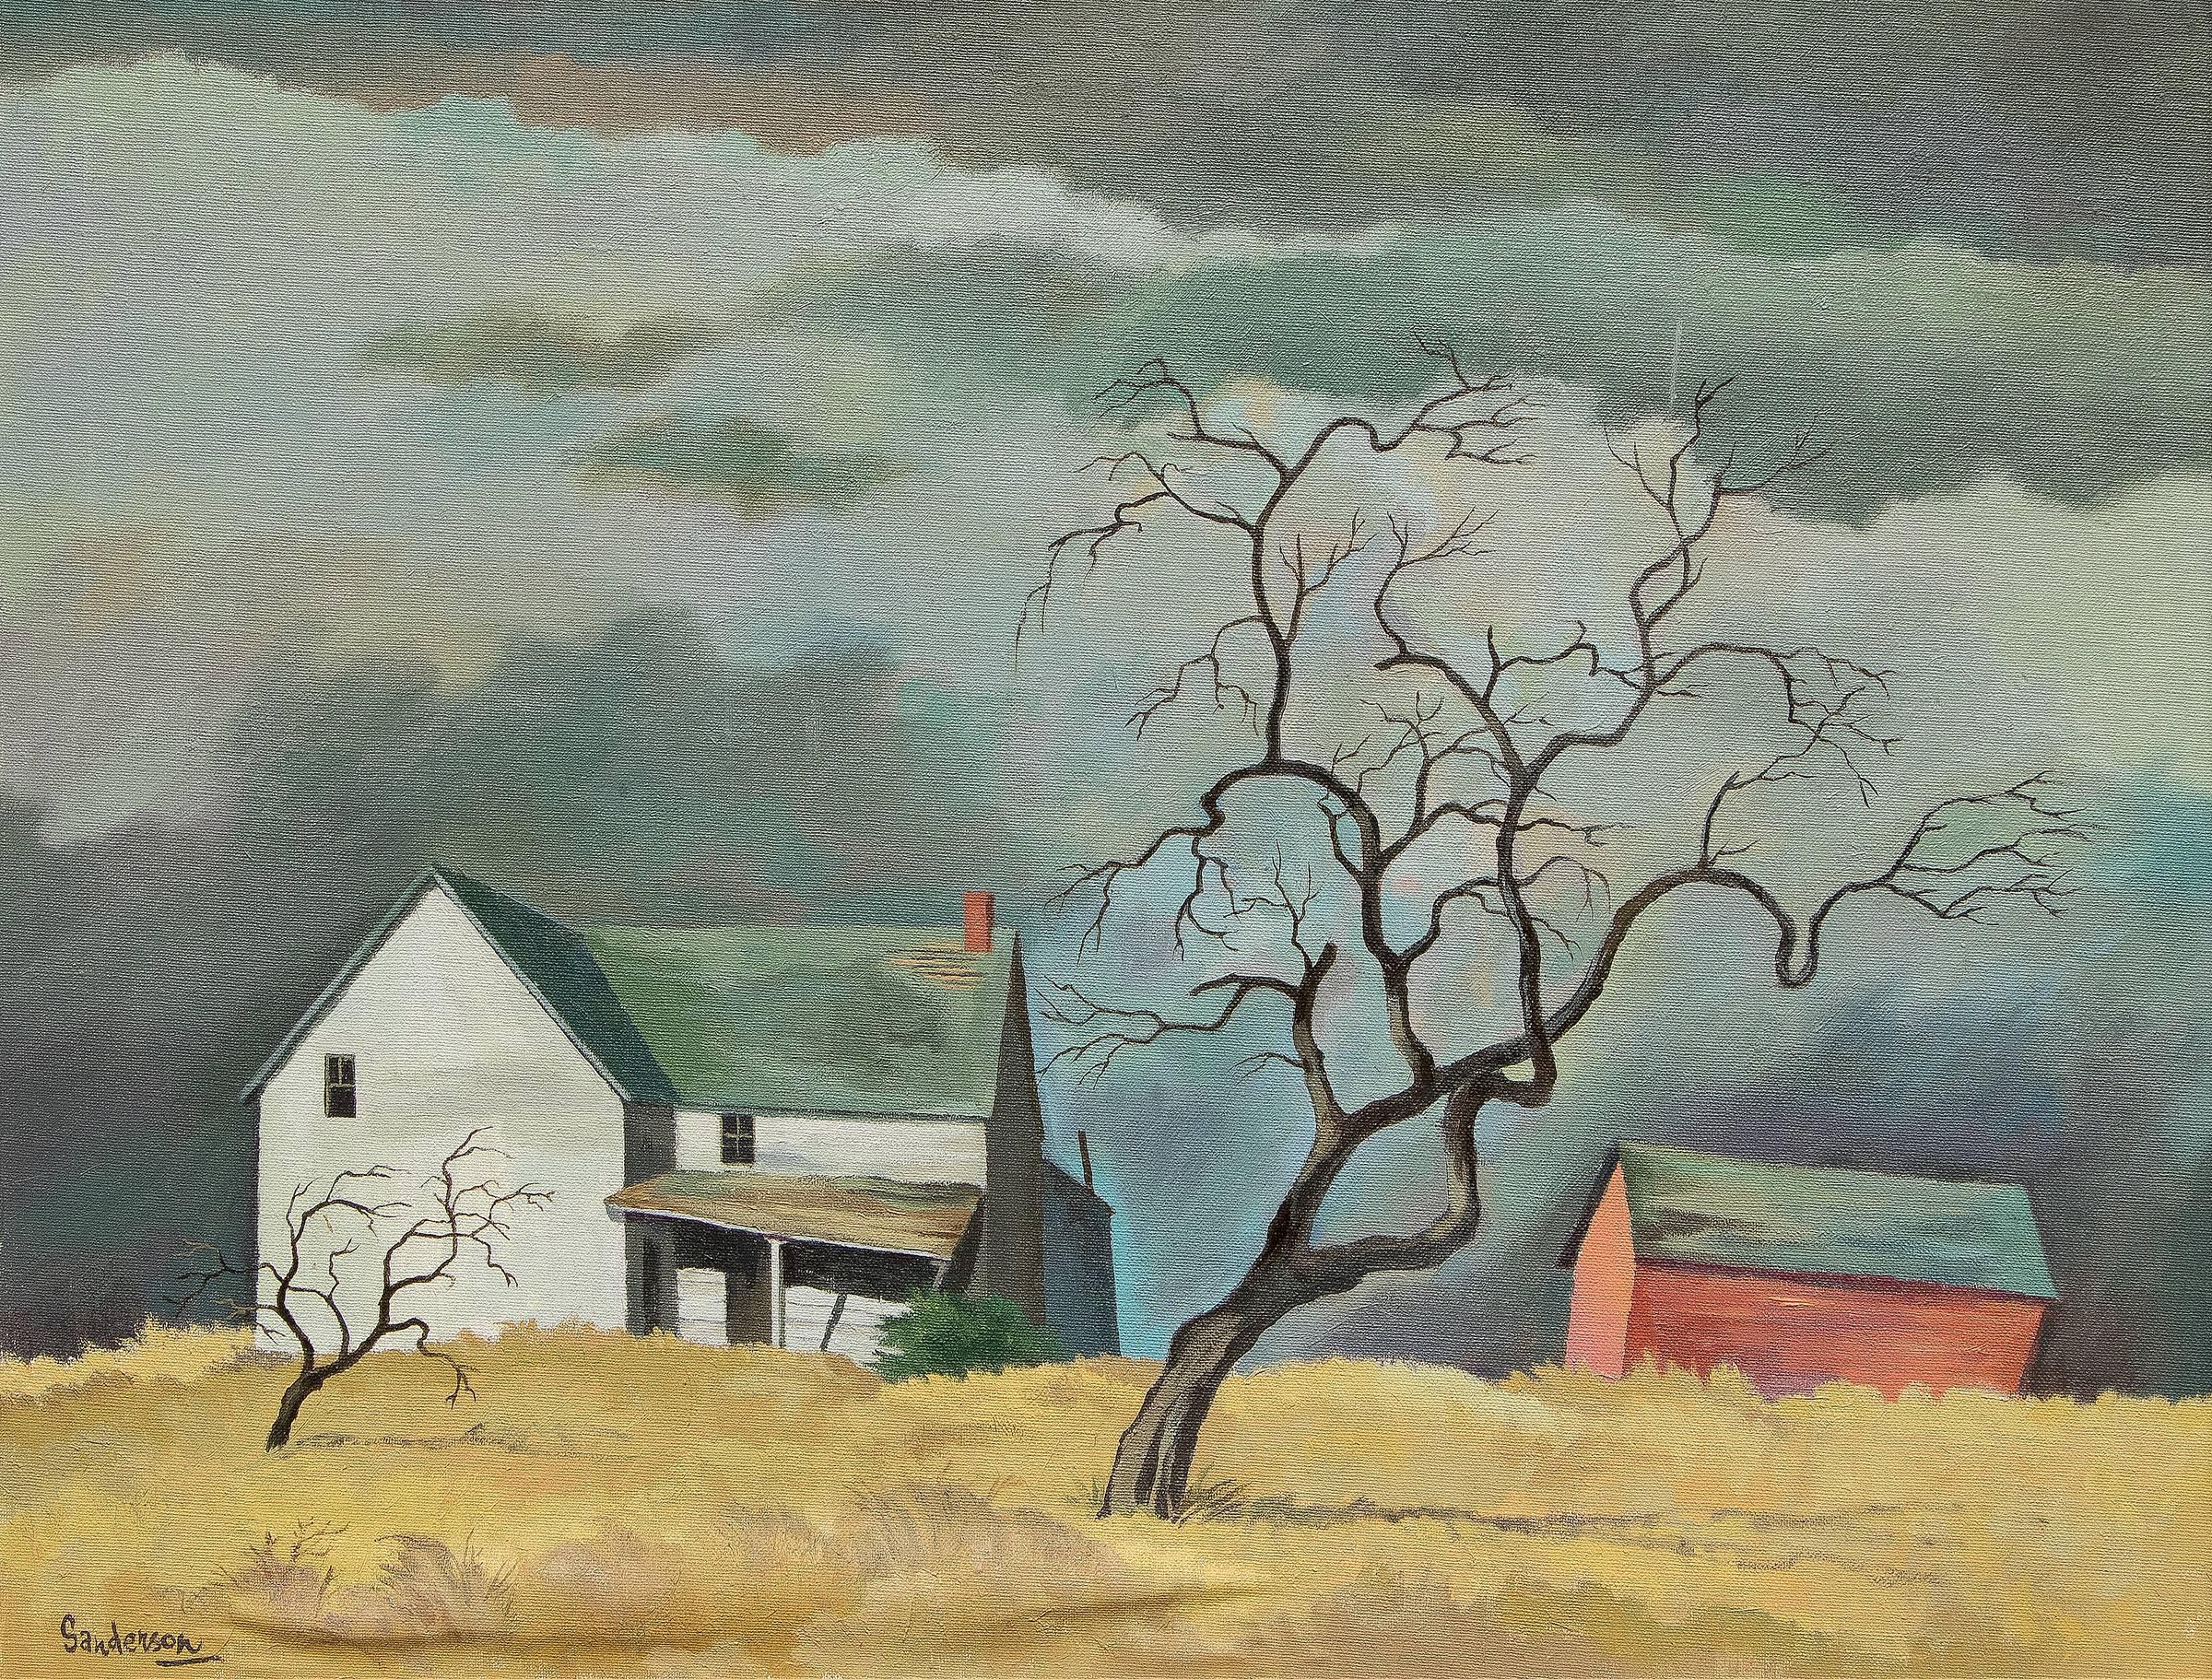 Red Barn and Tree (Surrealist/Modernist Colorado Landscape) - Painting by William Sanderson